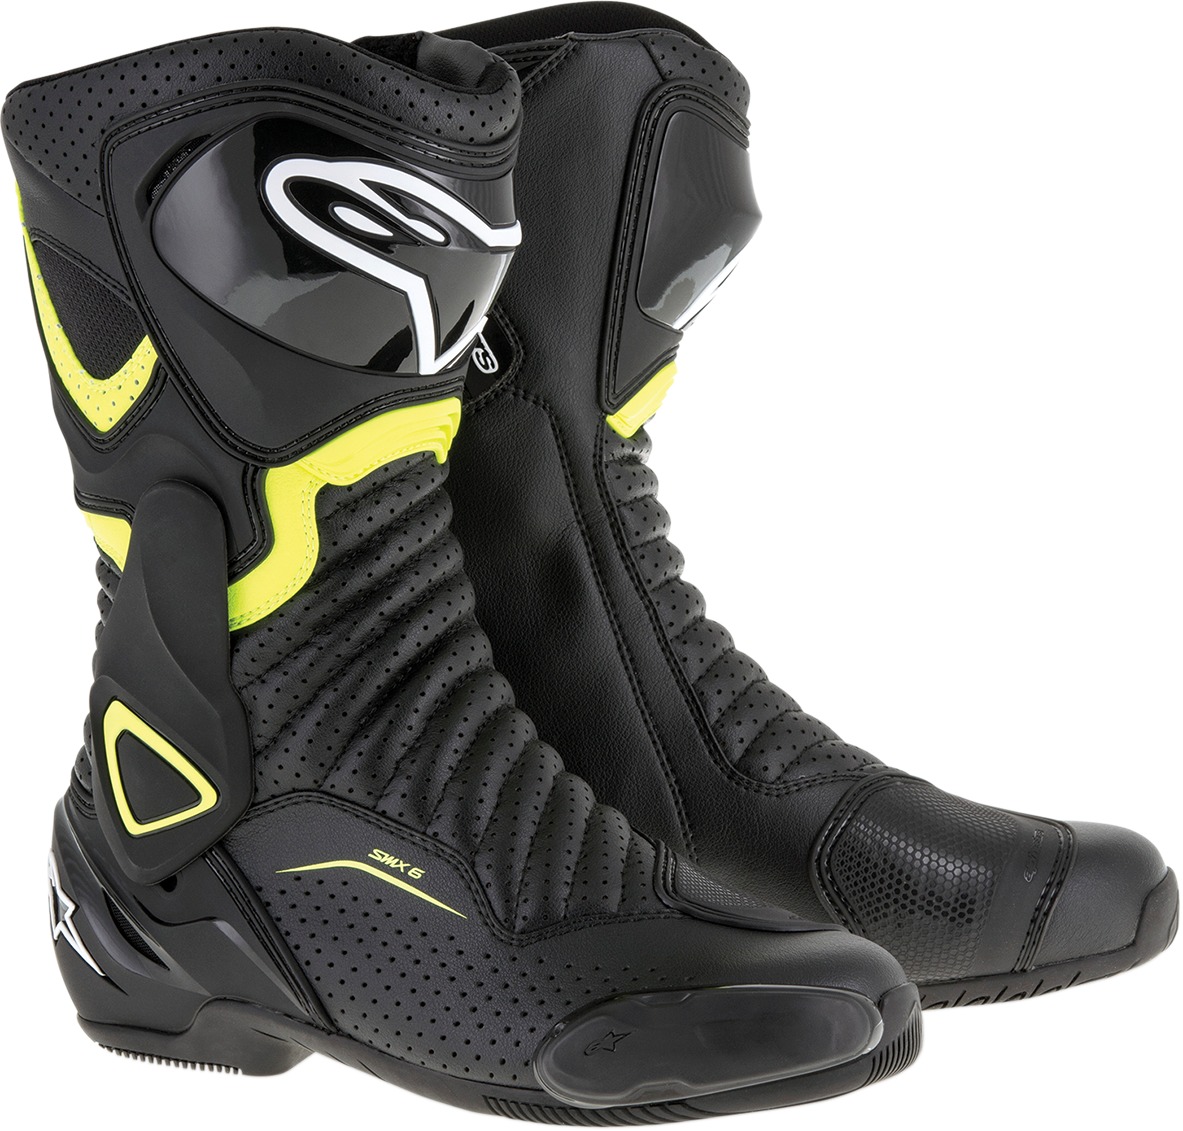 SMX-6v2 Vented Street Riding Boots Black/Yellow US 7.5 - Click Image to Close